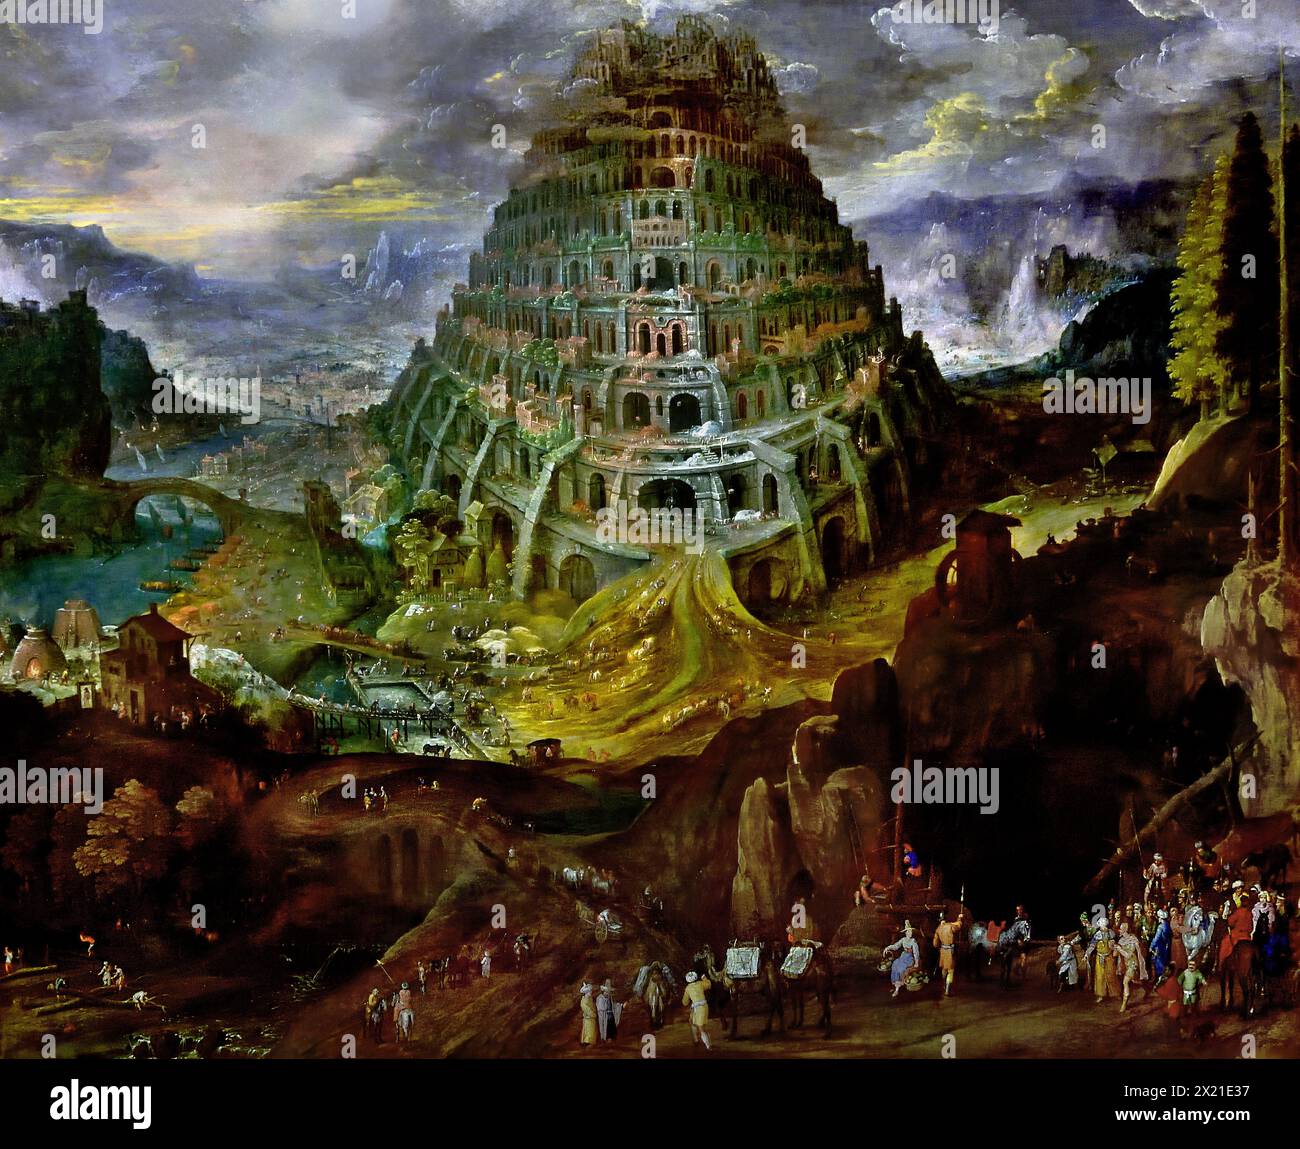 The Tower of Babel by Jan Brueghel I 1565-1625 and Tobias Verhaecht 1561-1631  Royal Museum of Fine Arts,  Antwerp, Belgium, Belgian ( Tower of Babel, According to Genesis, the Babylonians wanted to make a name for themselves by building a mighty city and a tower “with its top in the heavens.” God disrupted the work by so confusing the language of the workers that they could no longer understand one another.). Stock Photo